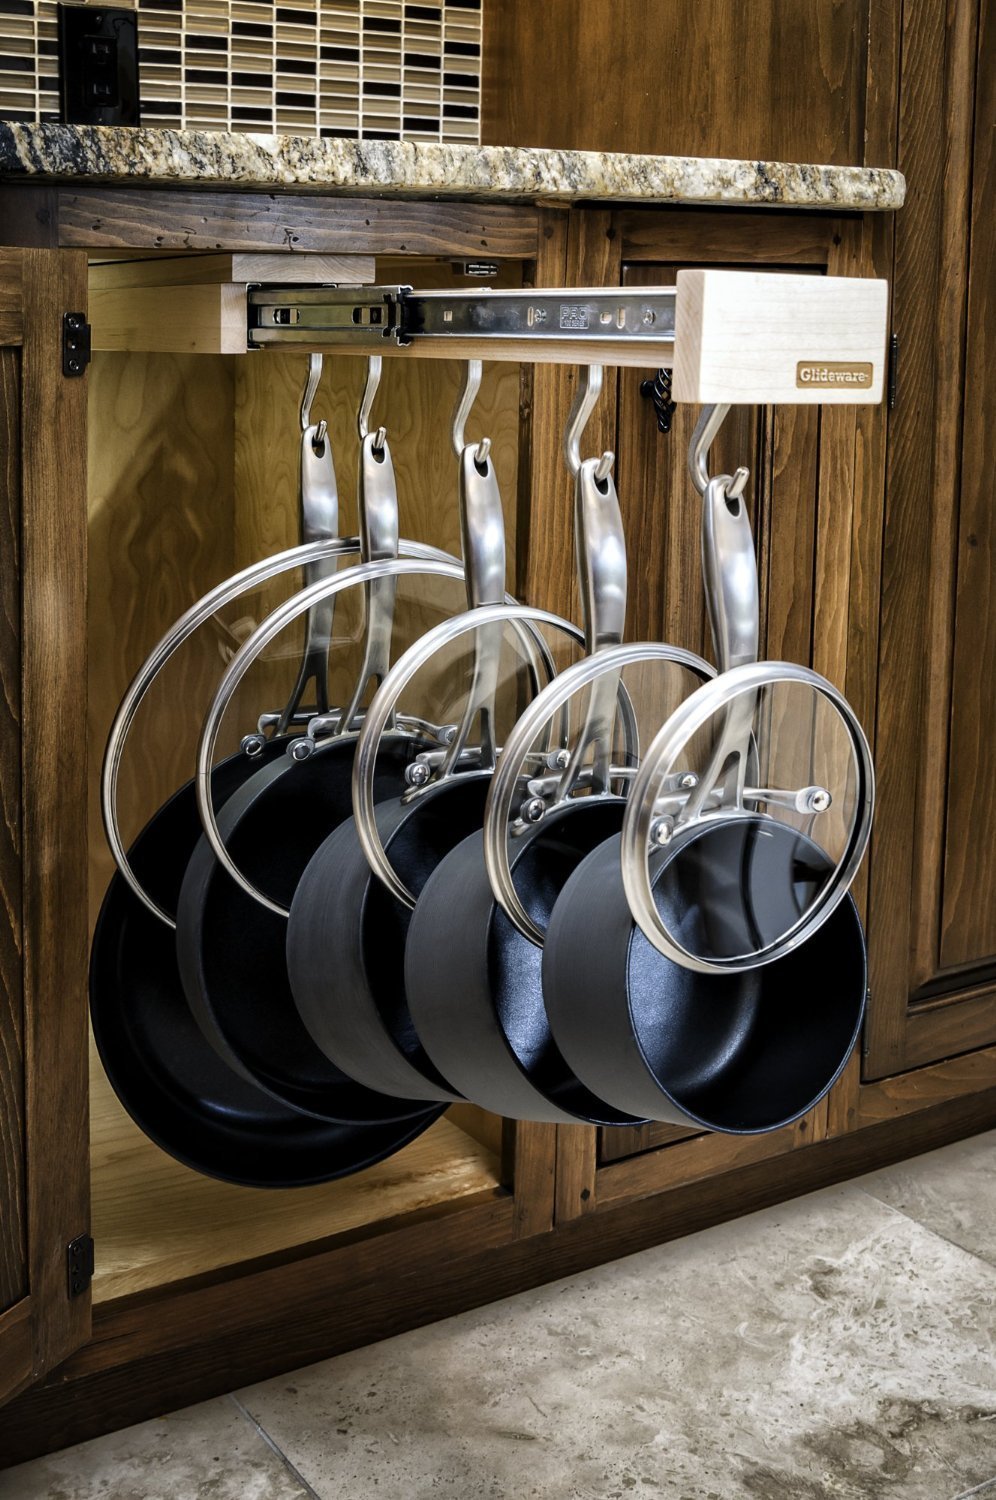 Organizing Pots And Pans Ideas Solutions, Pot Rack Inside Cabinet